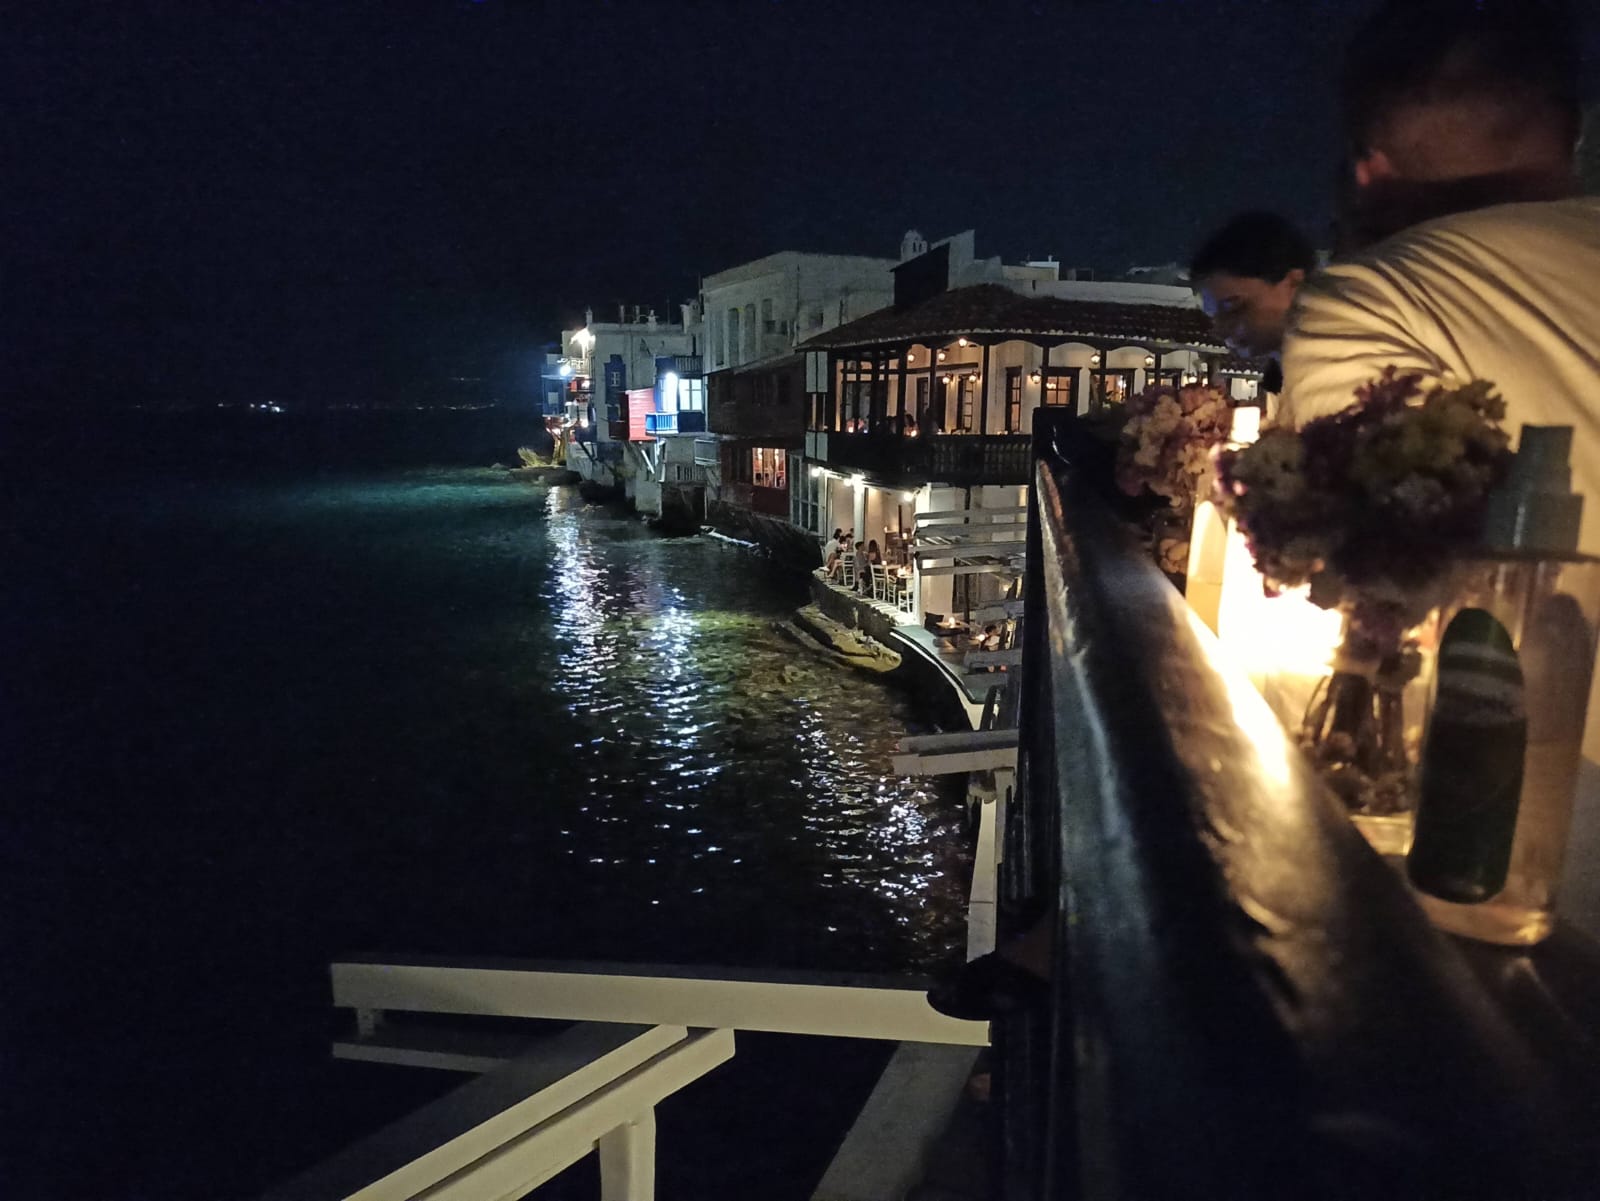 People having fun with night drinks on a balcony by the sea